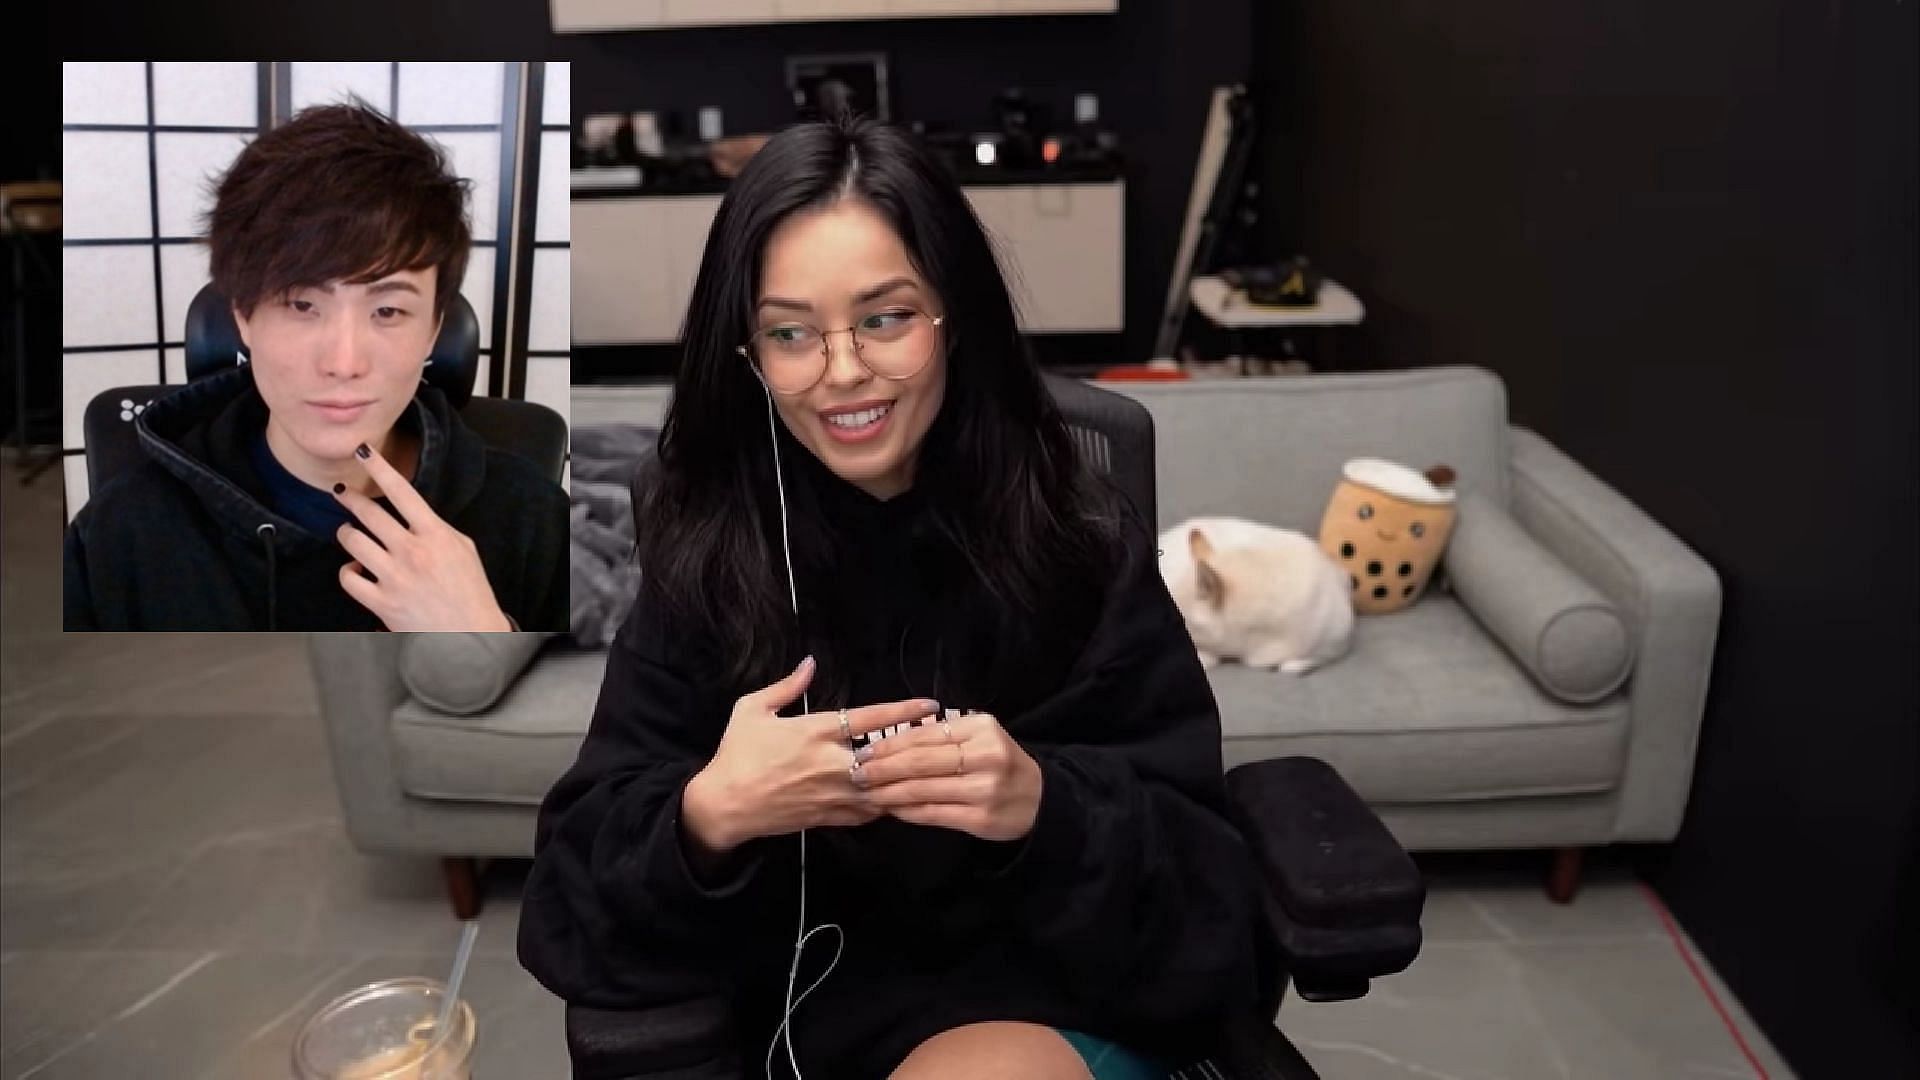 Sykkuno joked with Valkyrae when she wanted to know when he was planning to move in (Image via Valkyrae/YouTube)